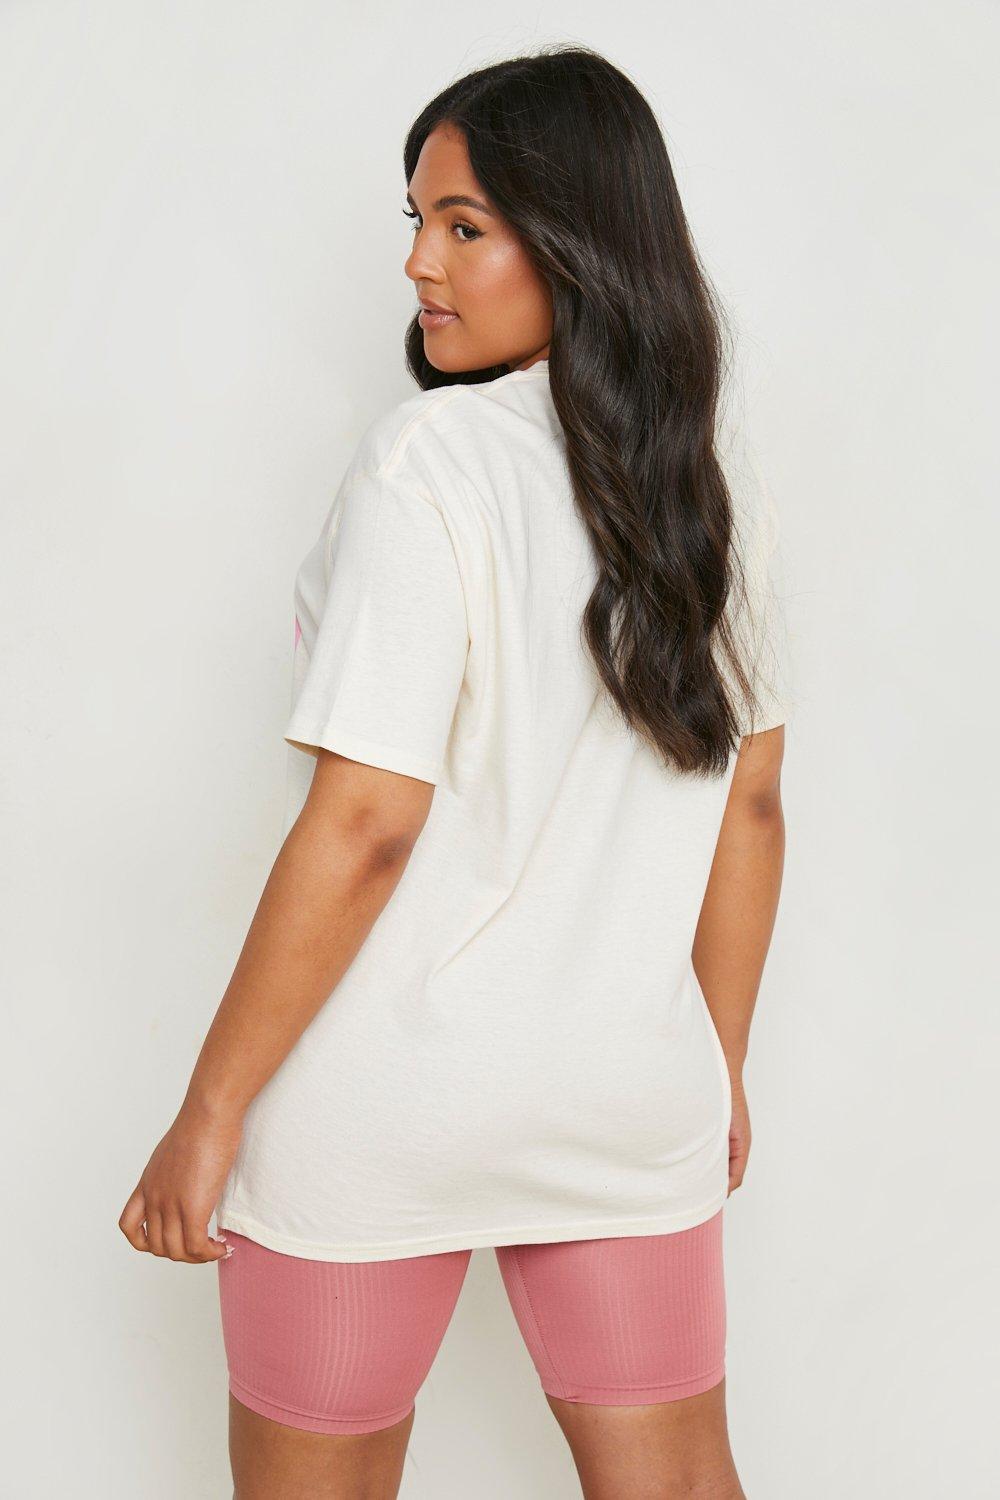 Boohoo Femme Vêtements Tops & T-shirts T-shirts Polos Grande Taille 